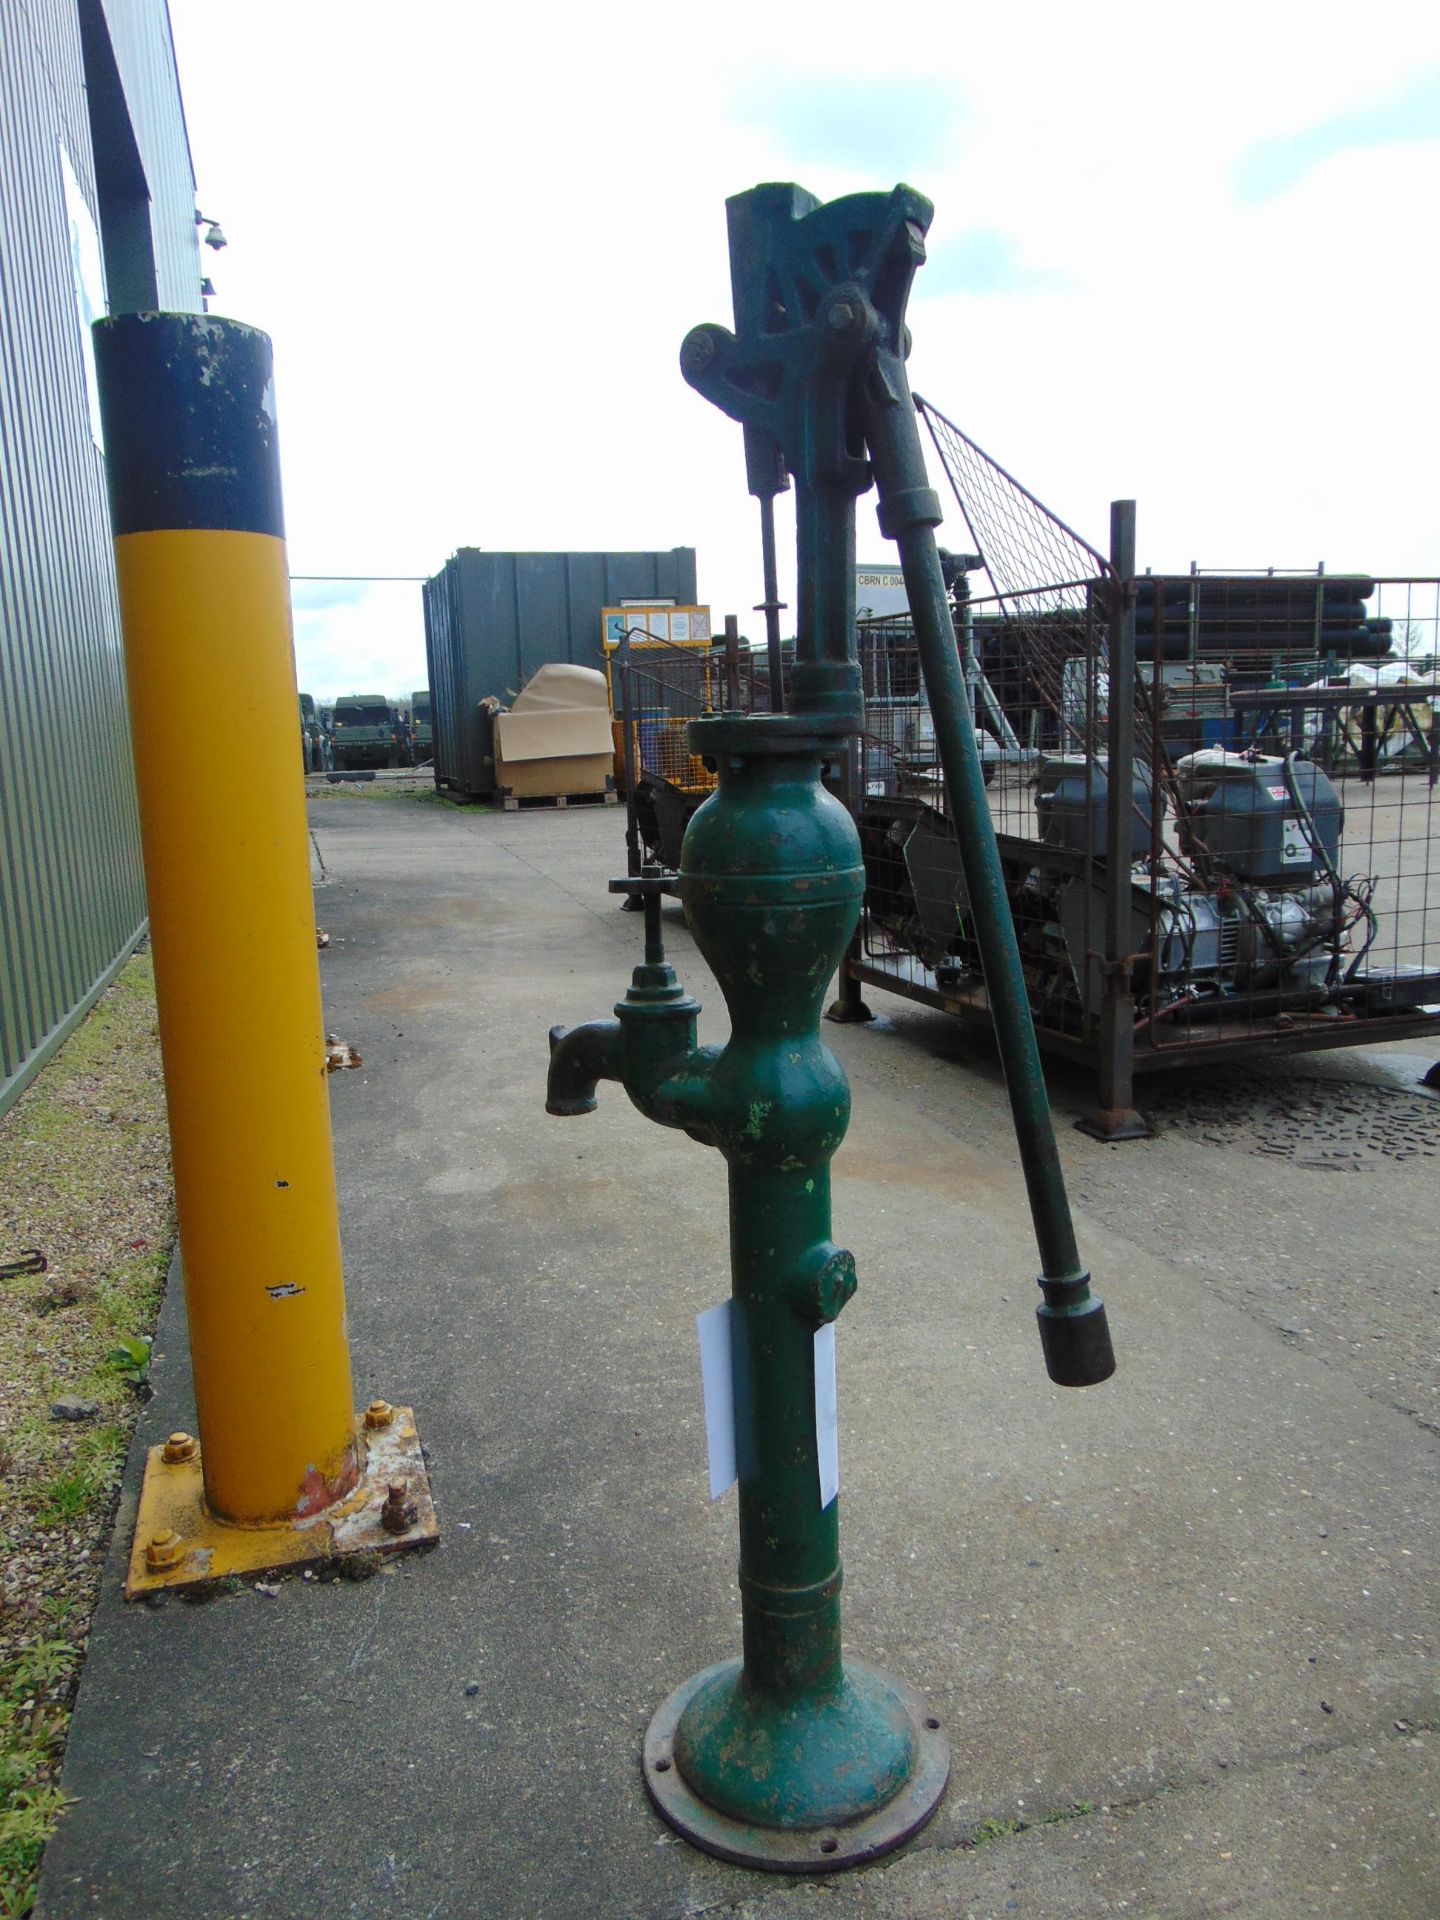 GENUINE ANTIQUE FULL SIZE CAST IRON WATER PUMP - Image 5 of 5